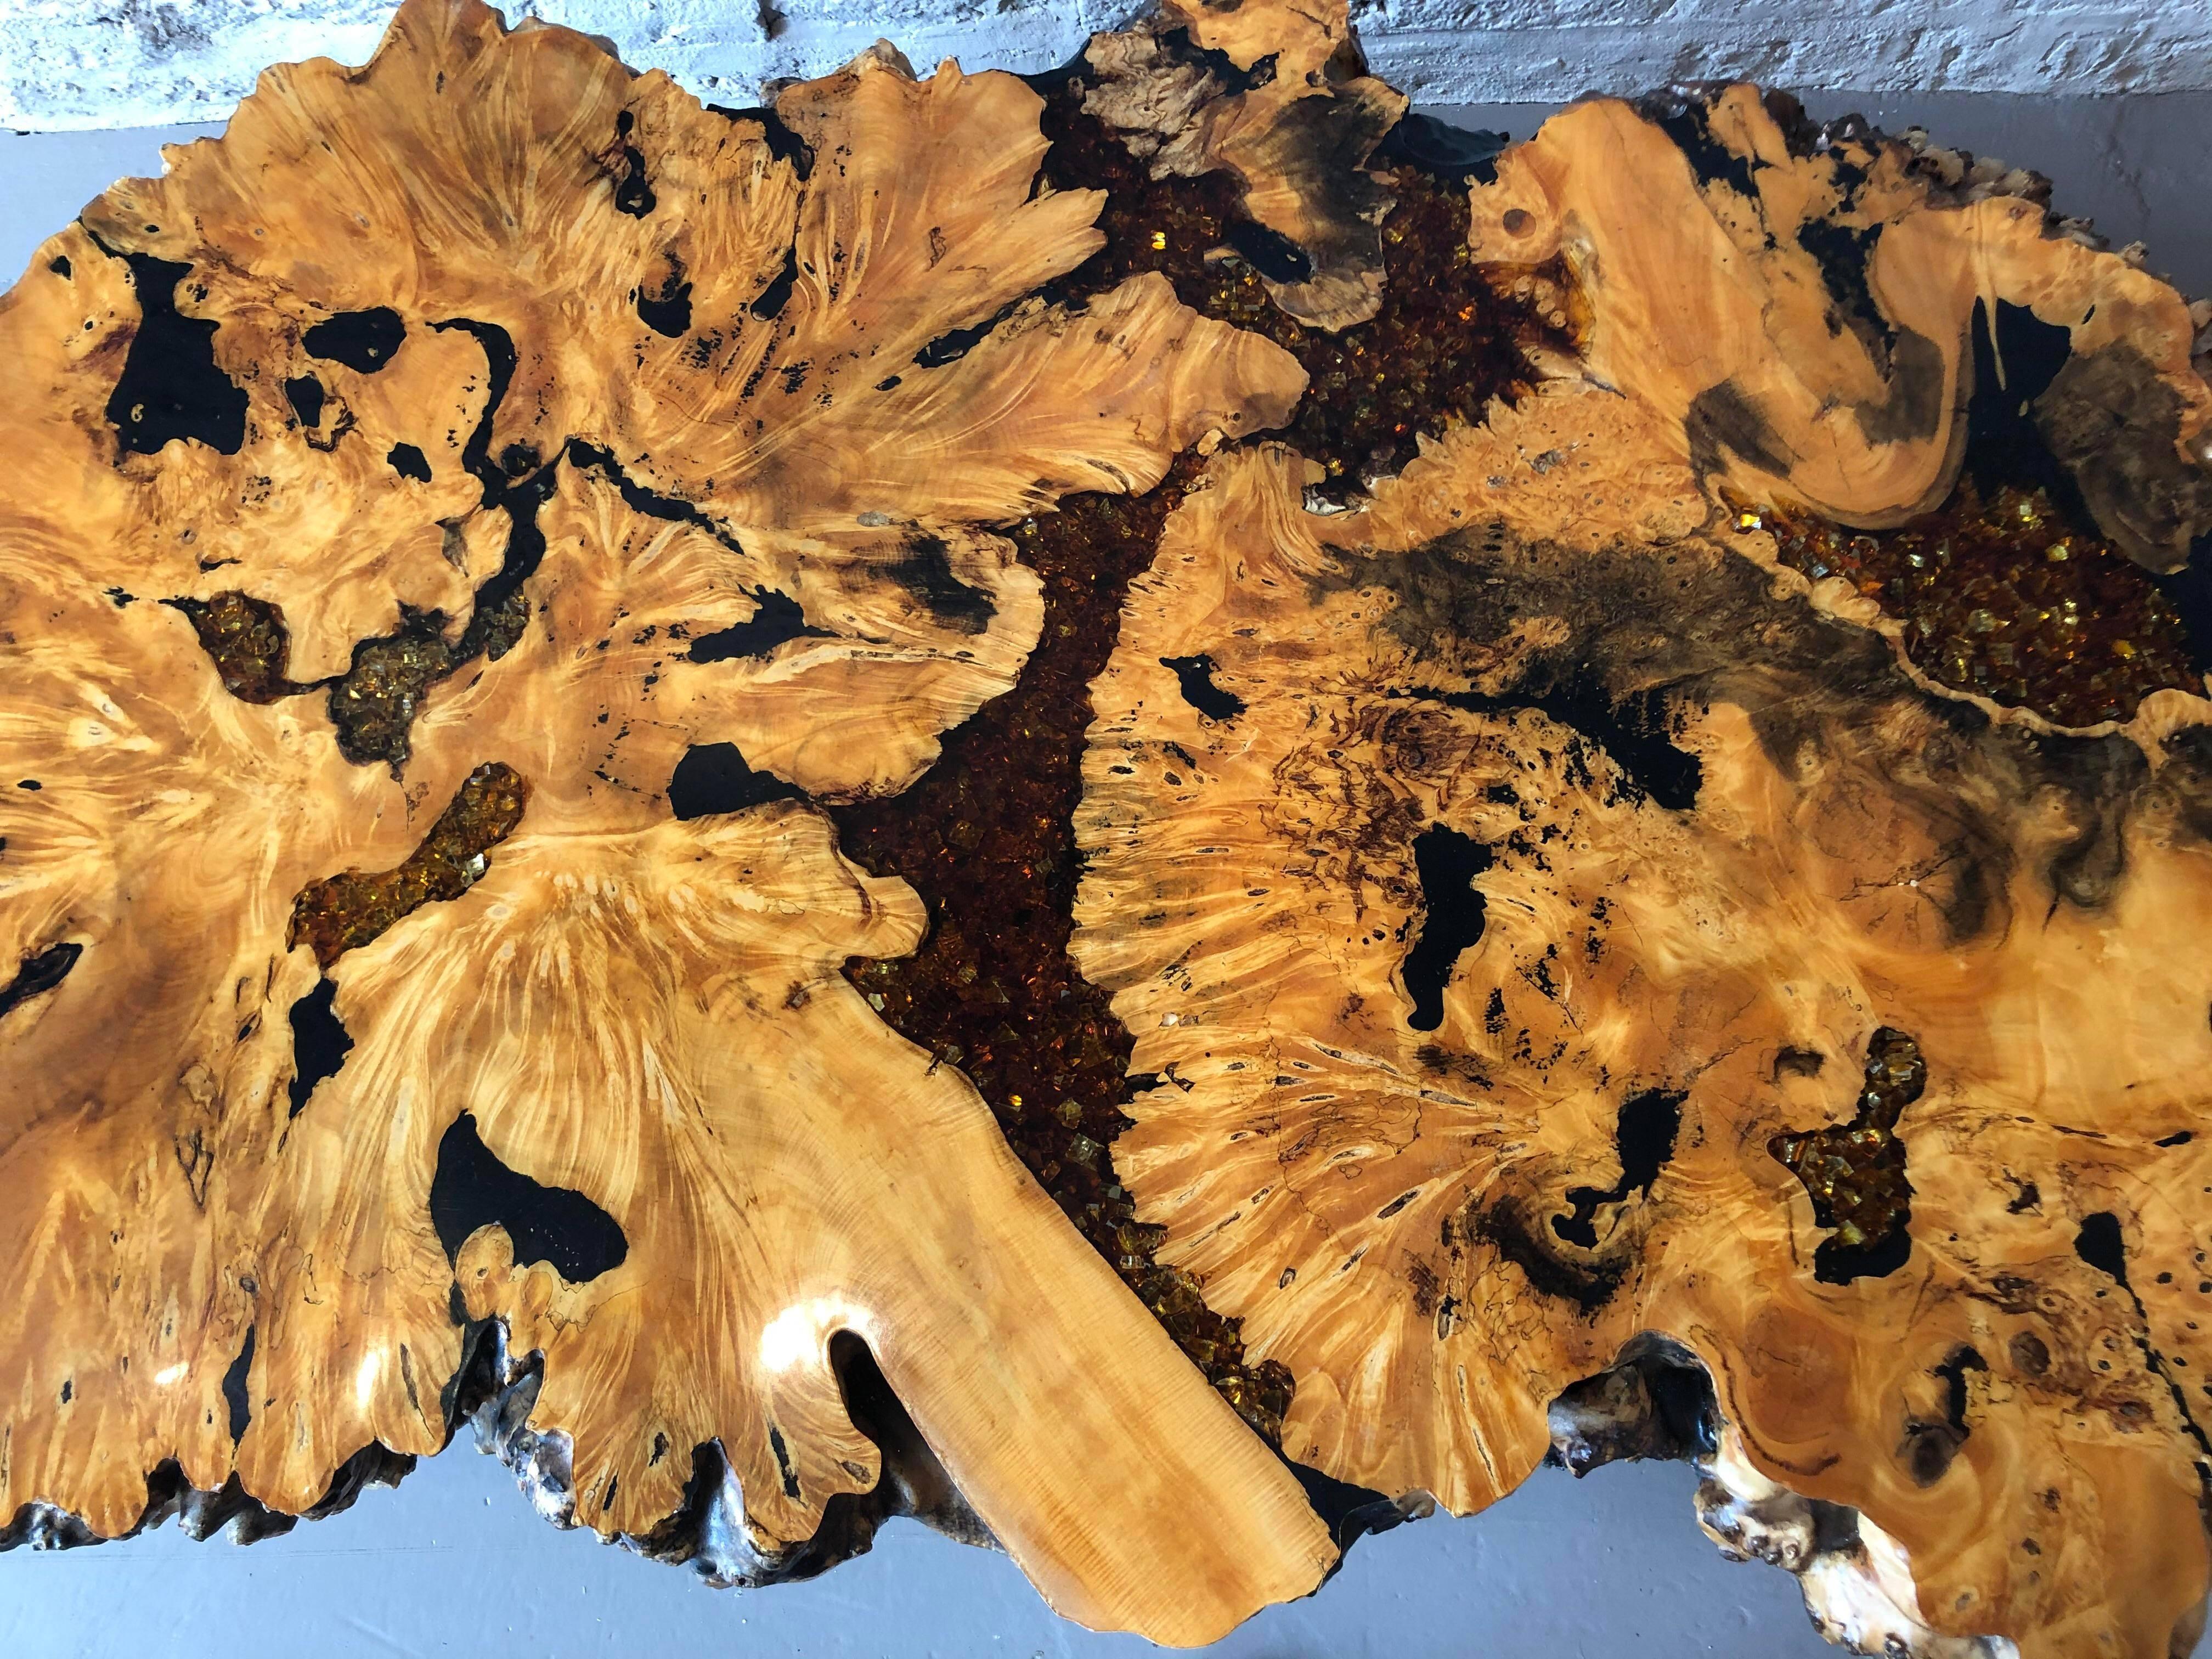 burl wood coffee table for sale